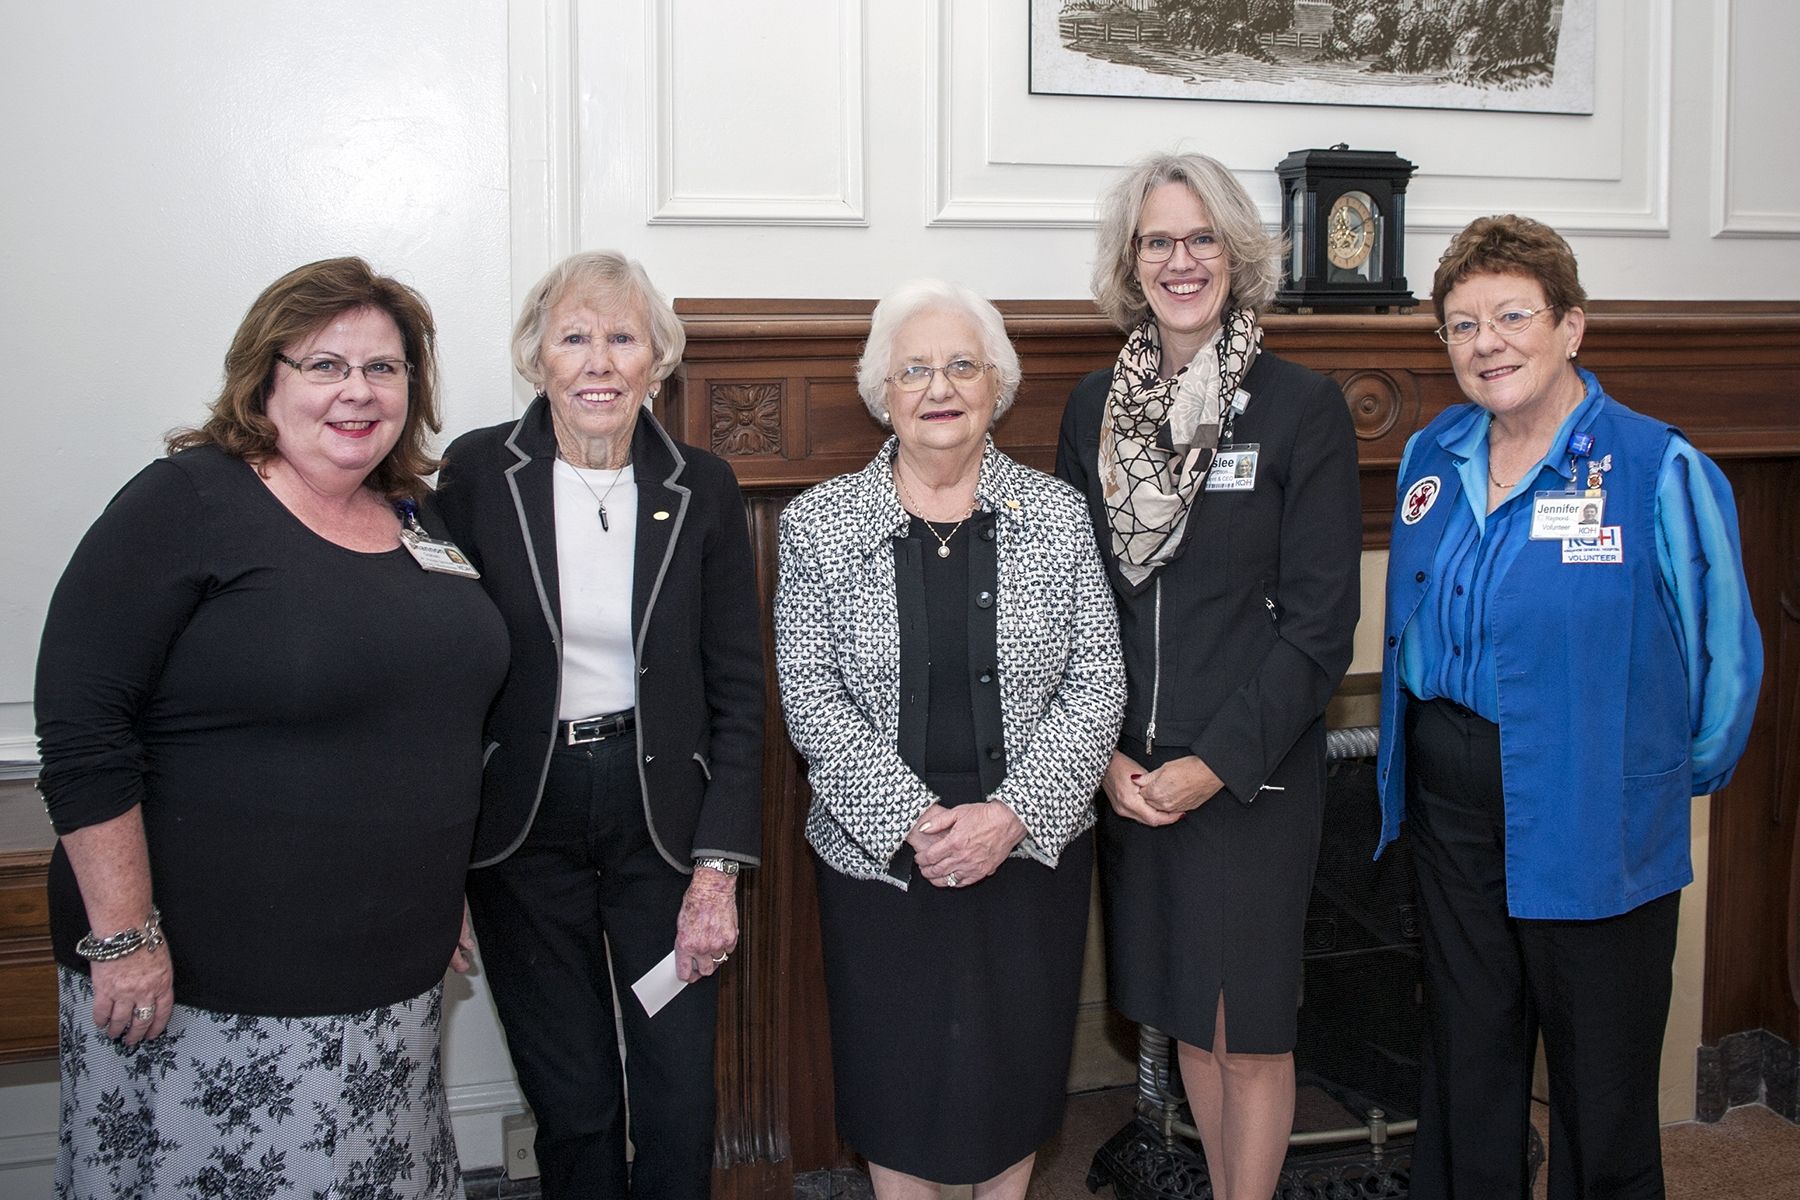 (From left) VP People Services and Organizational Effectiveness Shannon Graham, Volunteer Marion Atack, Volunteer Shirley Abramsky, CEO Leslee Thompson and Auxiliary President Jennie Raymond at a special service recognition event